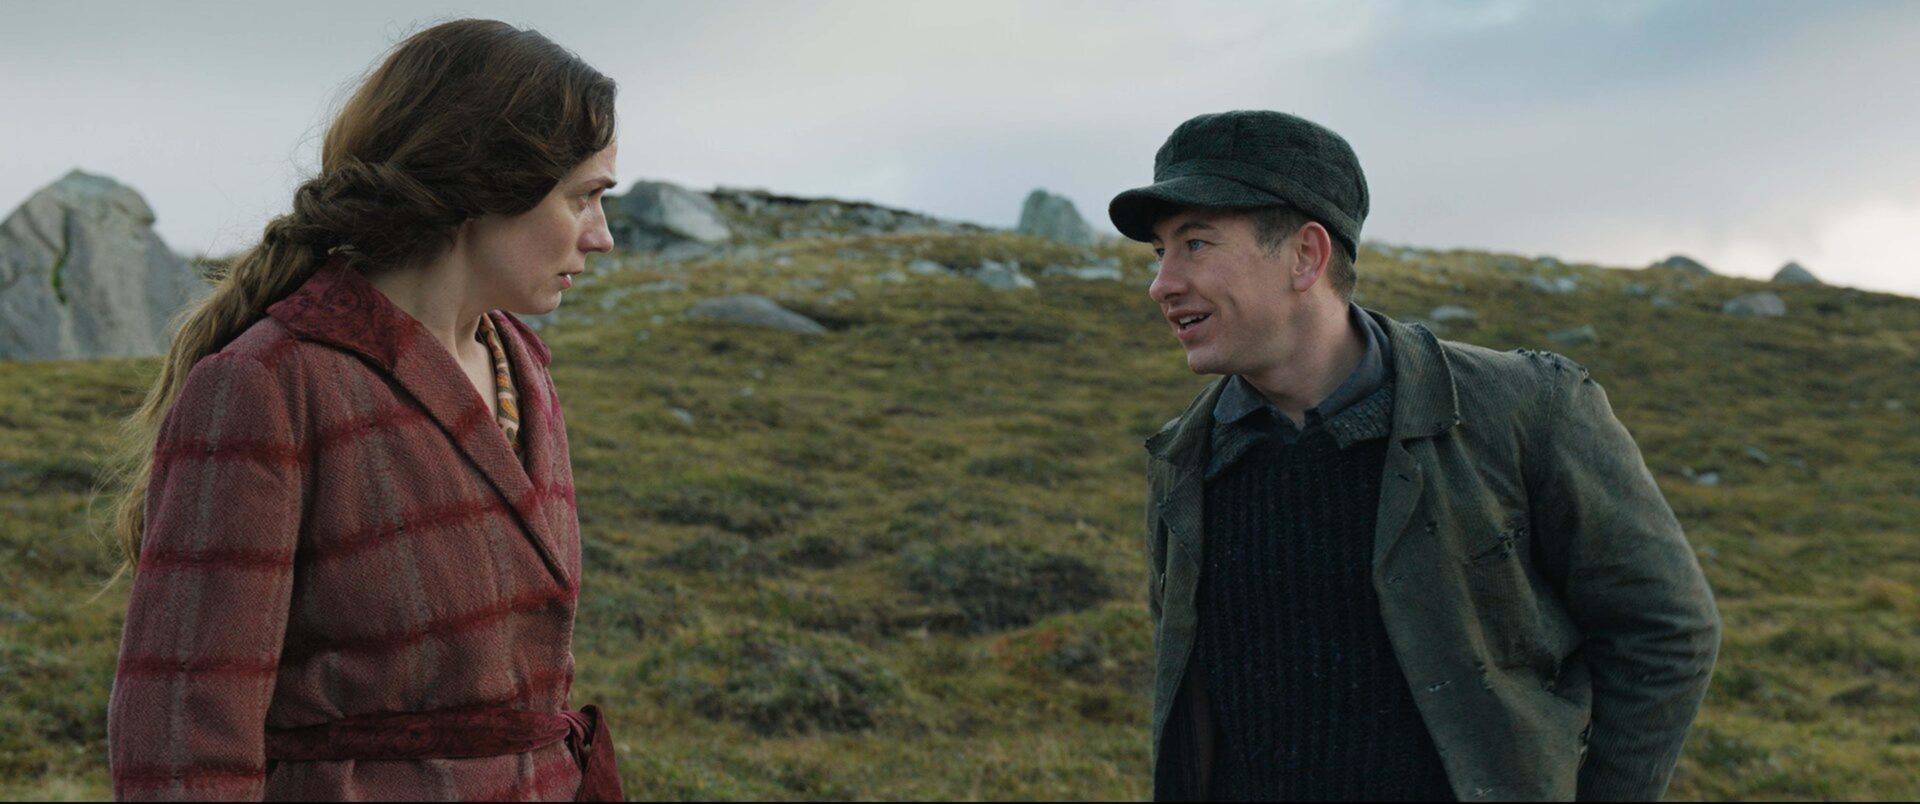 Kerry Condon and Barry Keoghan in the Banshees of Inisherin. Image: Moviestore Collection Ltd / Alamy